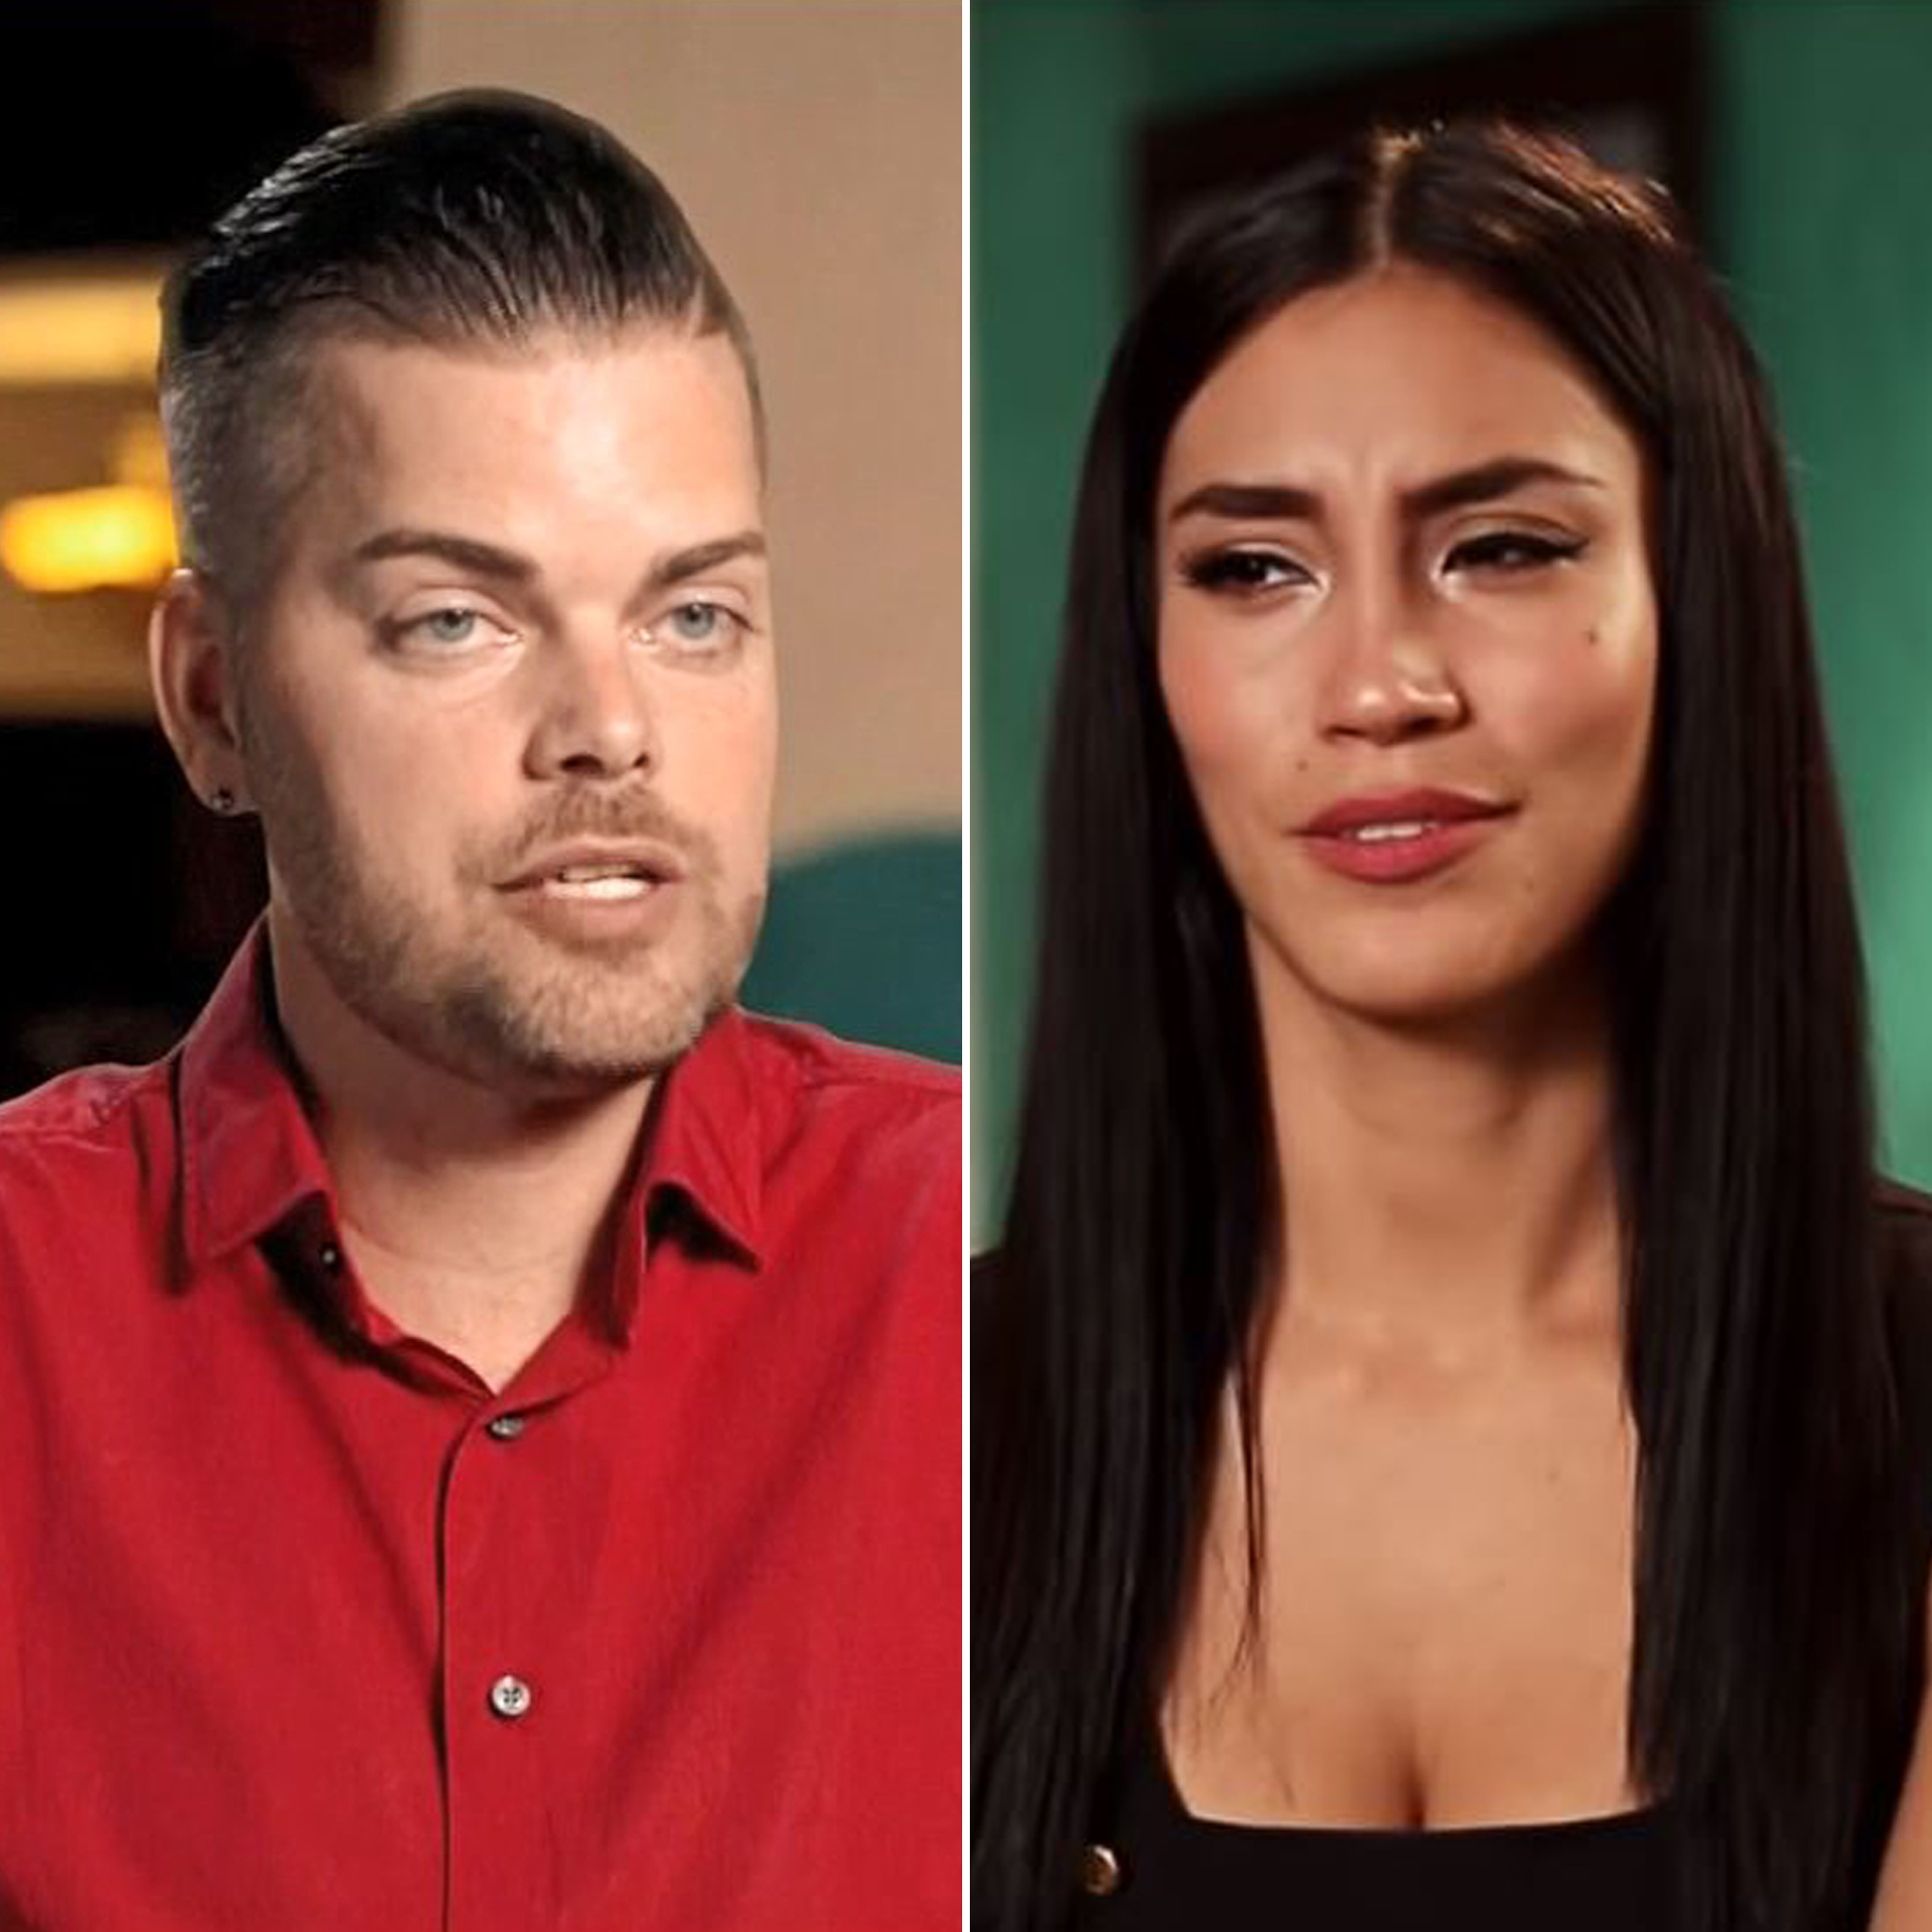 Turbine Fyrretræ jogger Did Jeniffer and Tim Meet in Mexico Before '90 Day Fiance'?